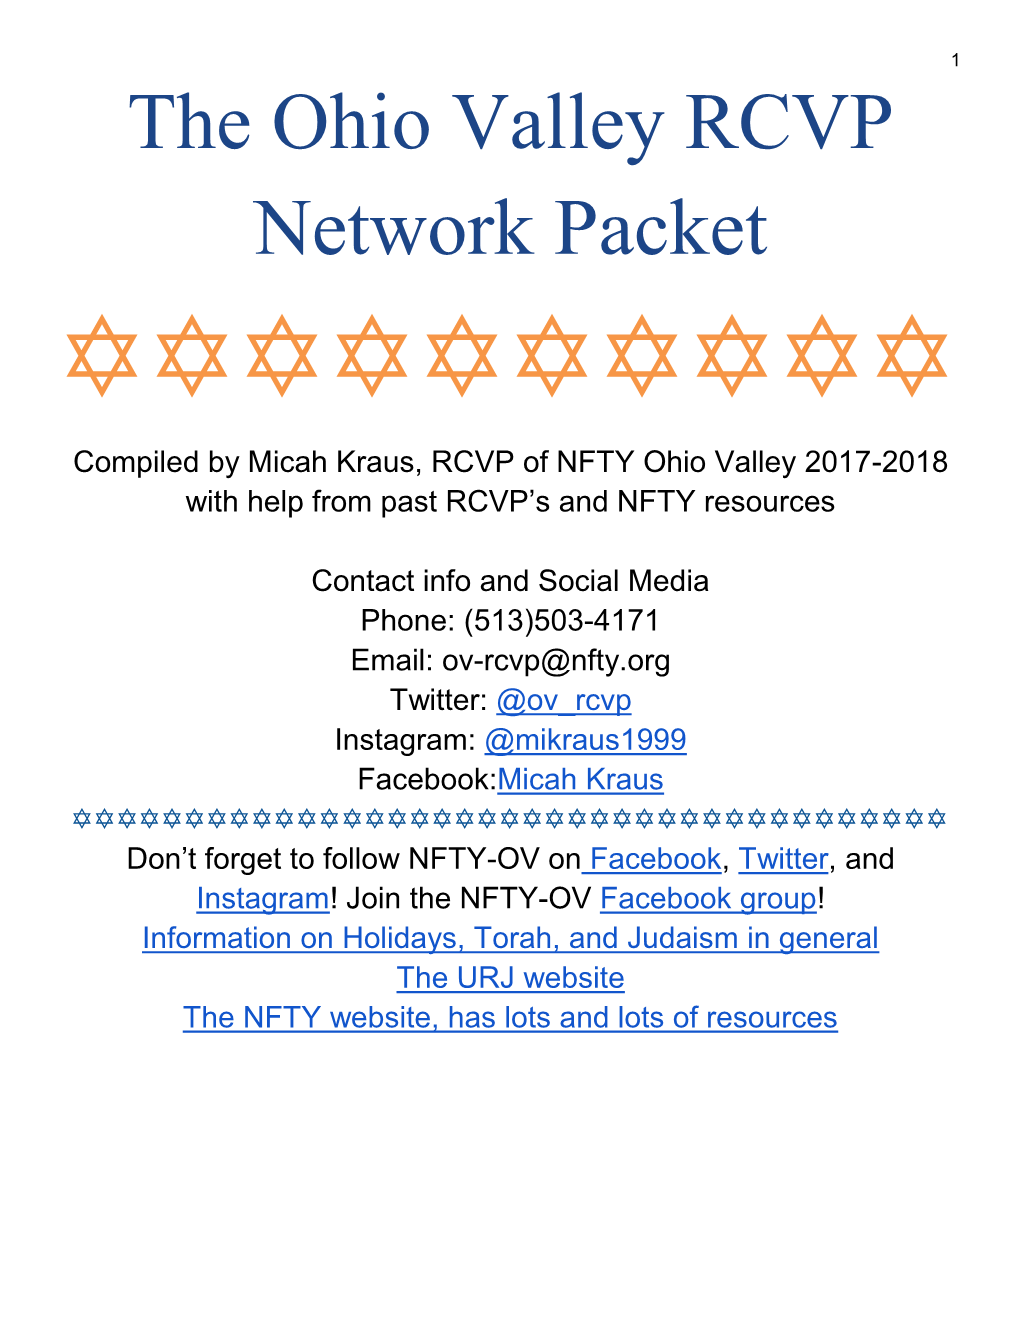 The Ohio Valley RCVP Network Packet ✡✡✡✡✡✡✡✡✡✡ Compiled by Micah Kraus, RCVP of NFTY Ohio Valley 2017-2018 with Help from Past RCVP’S and NFTY Resources